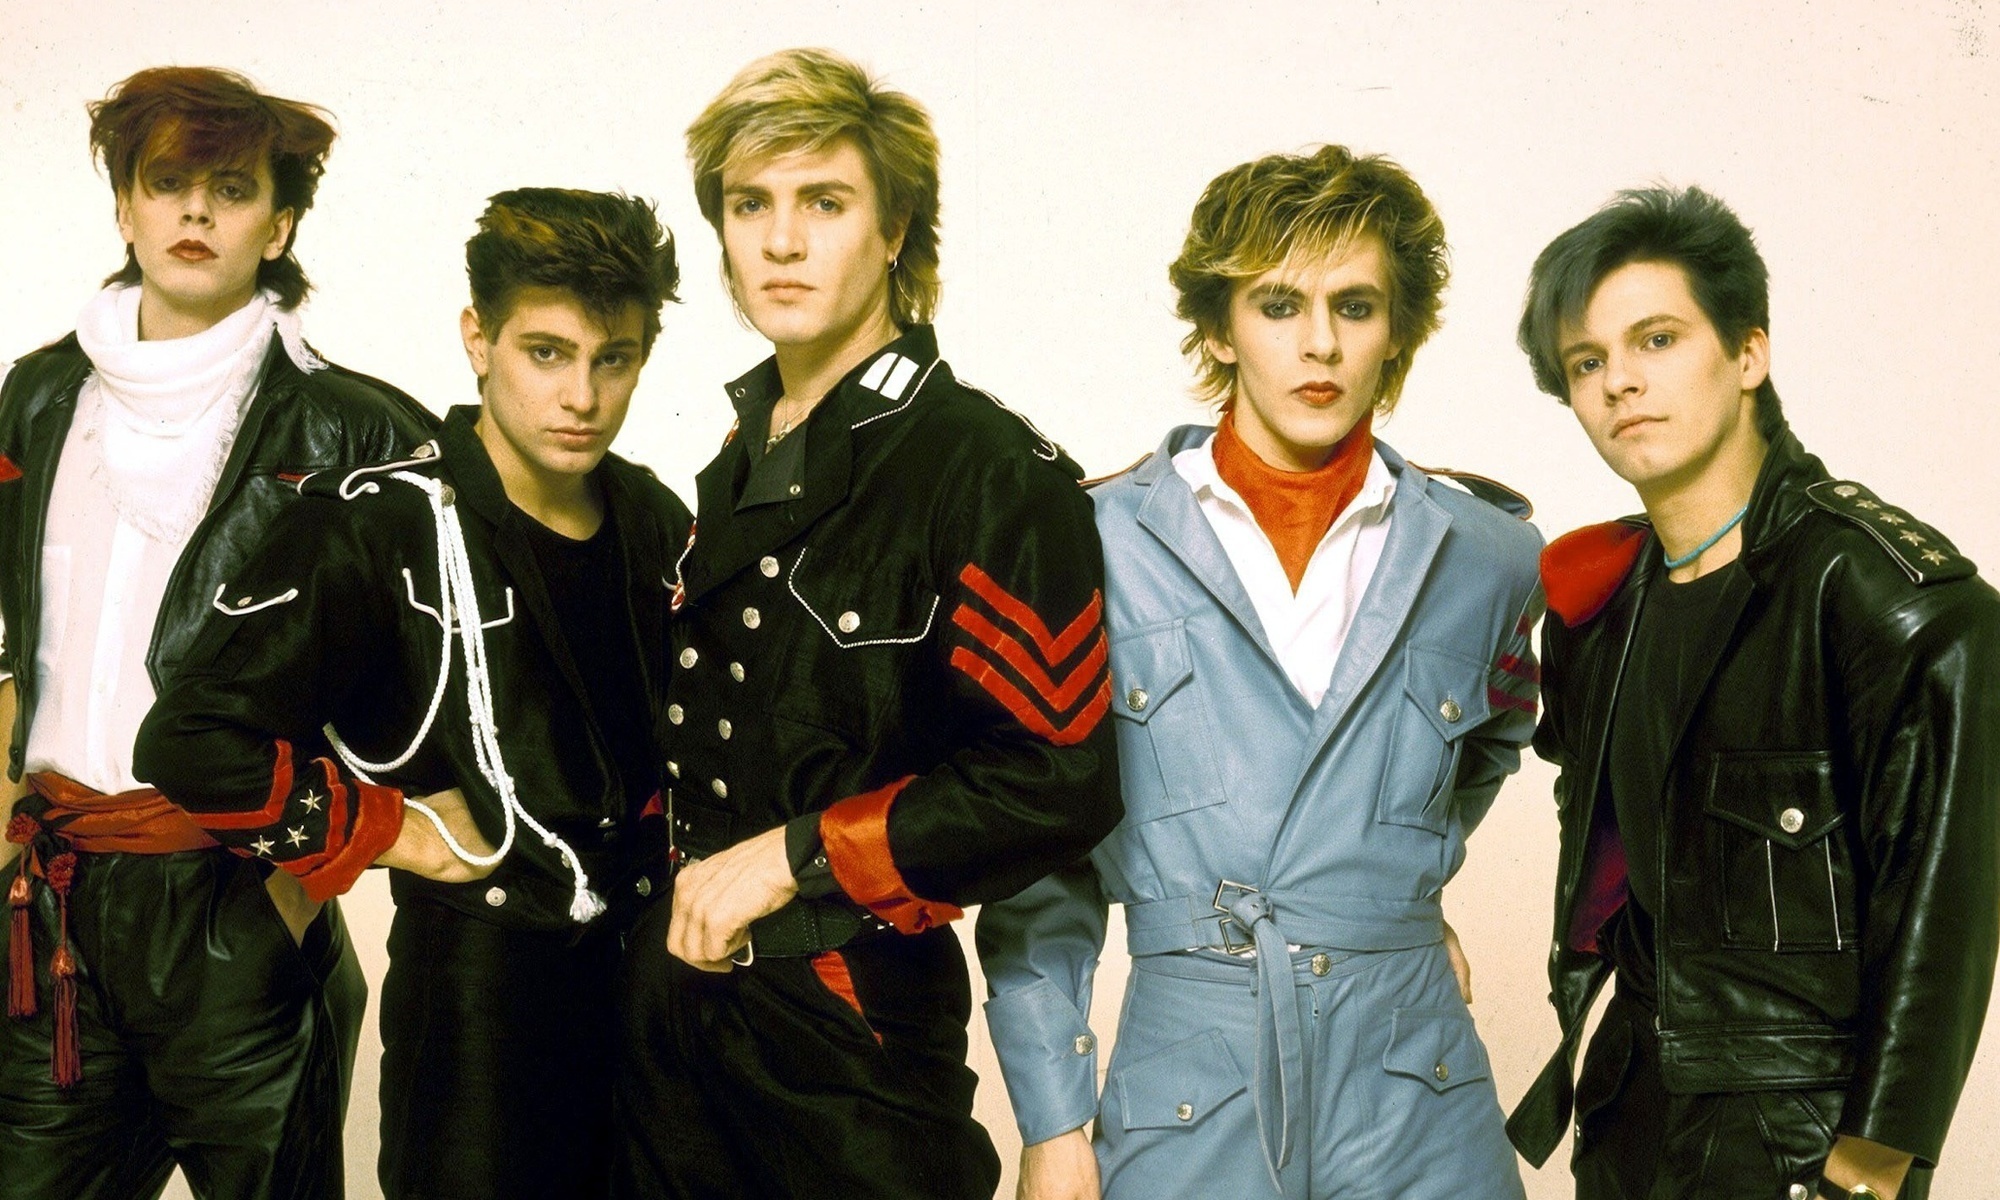 Duran Duran was named after a mad scientist from the Jane Fonda movie "Barbarella."